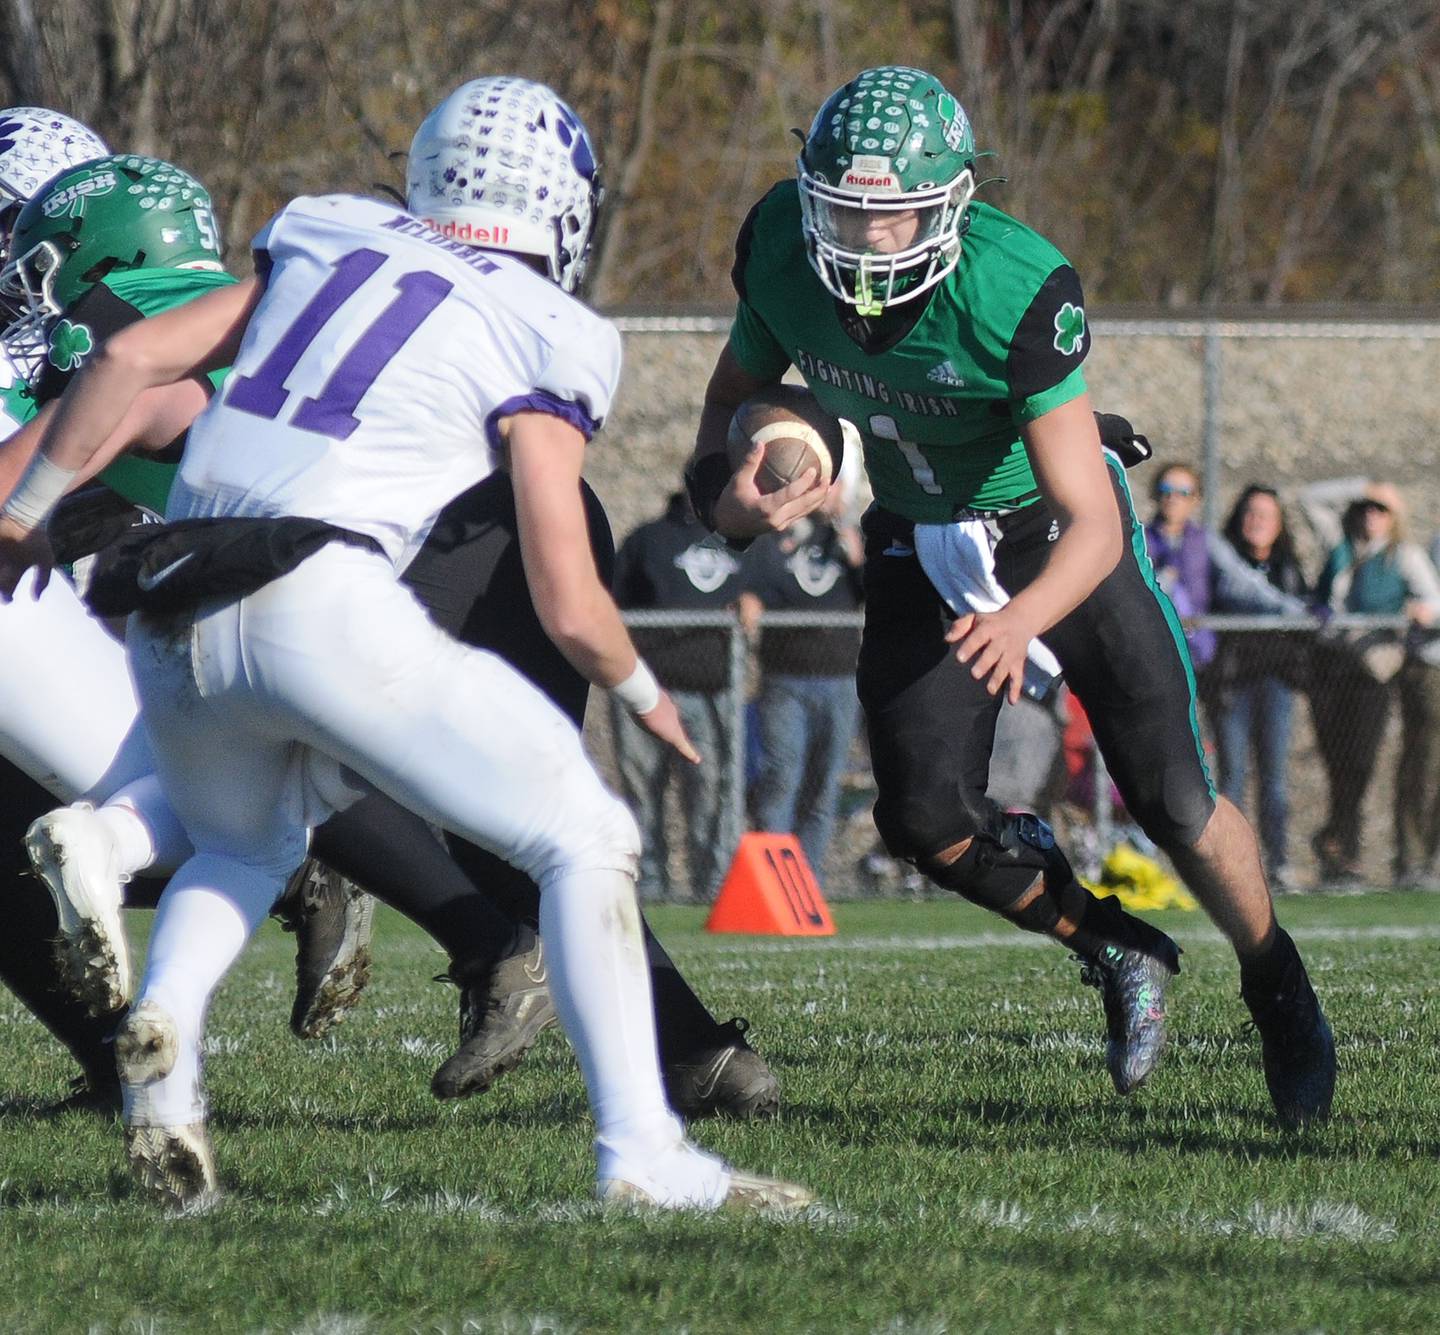 Seneca’s Nathan Grant looks to get past Wilmington’s Cade McCubbin on a run in the 1st quarter Saturday during the Class 2A Quarterfinal at Seneca.